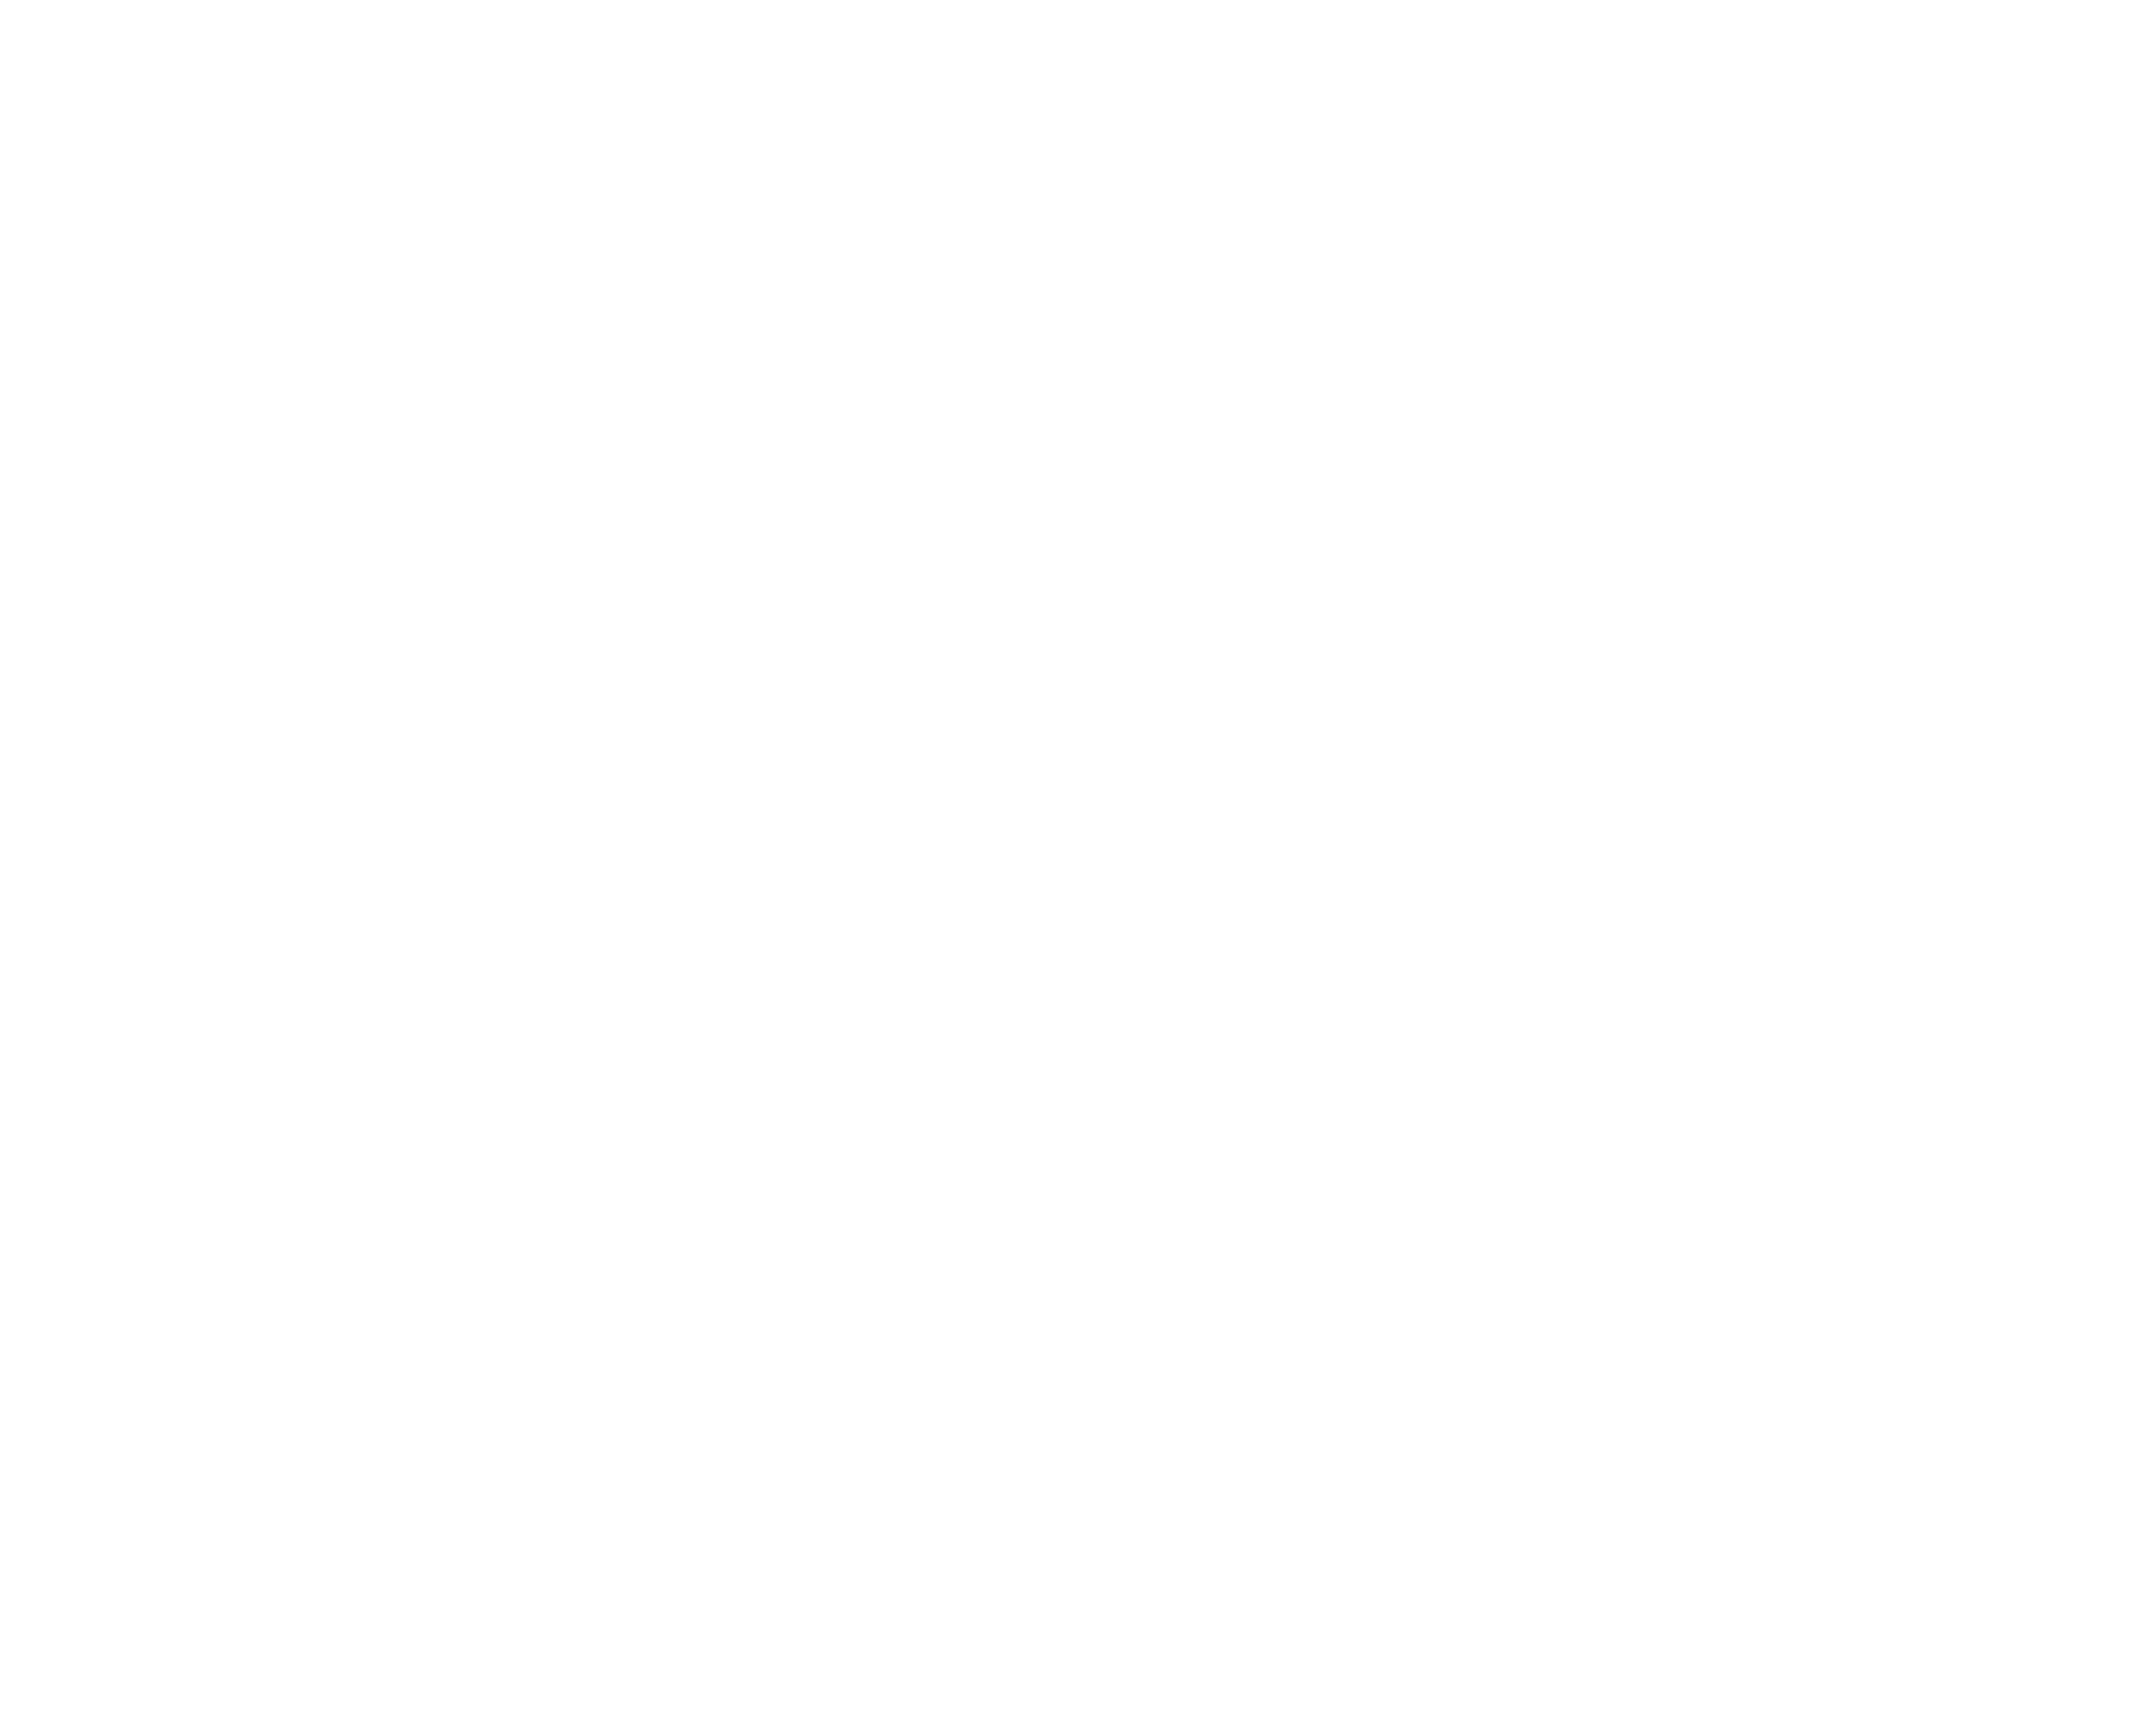 Main image for HT Global Industries Limited